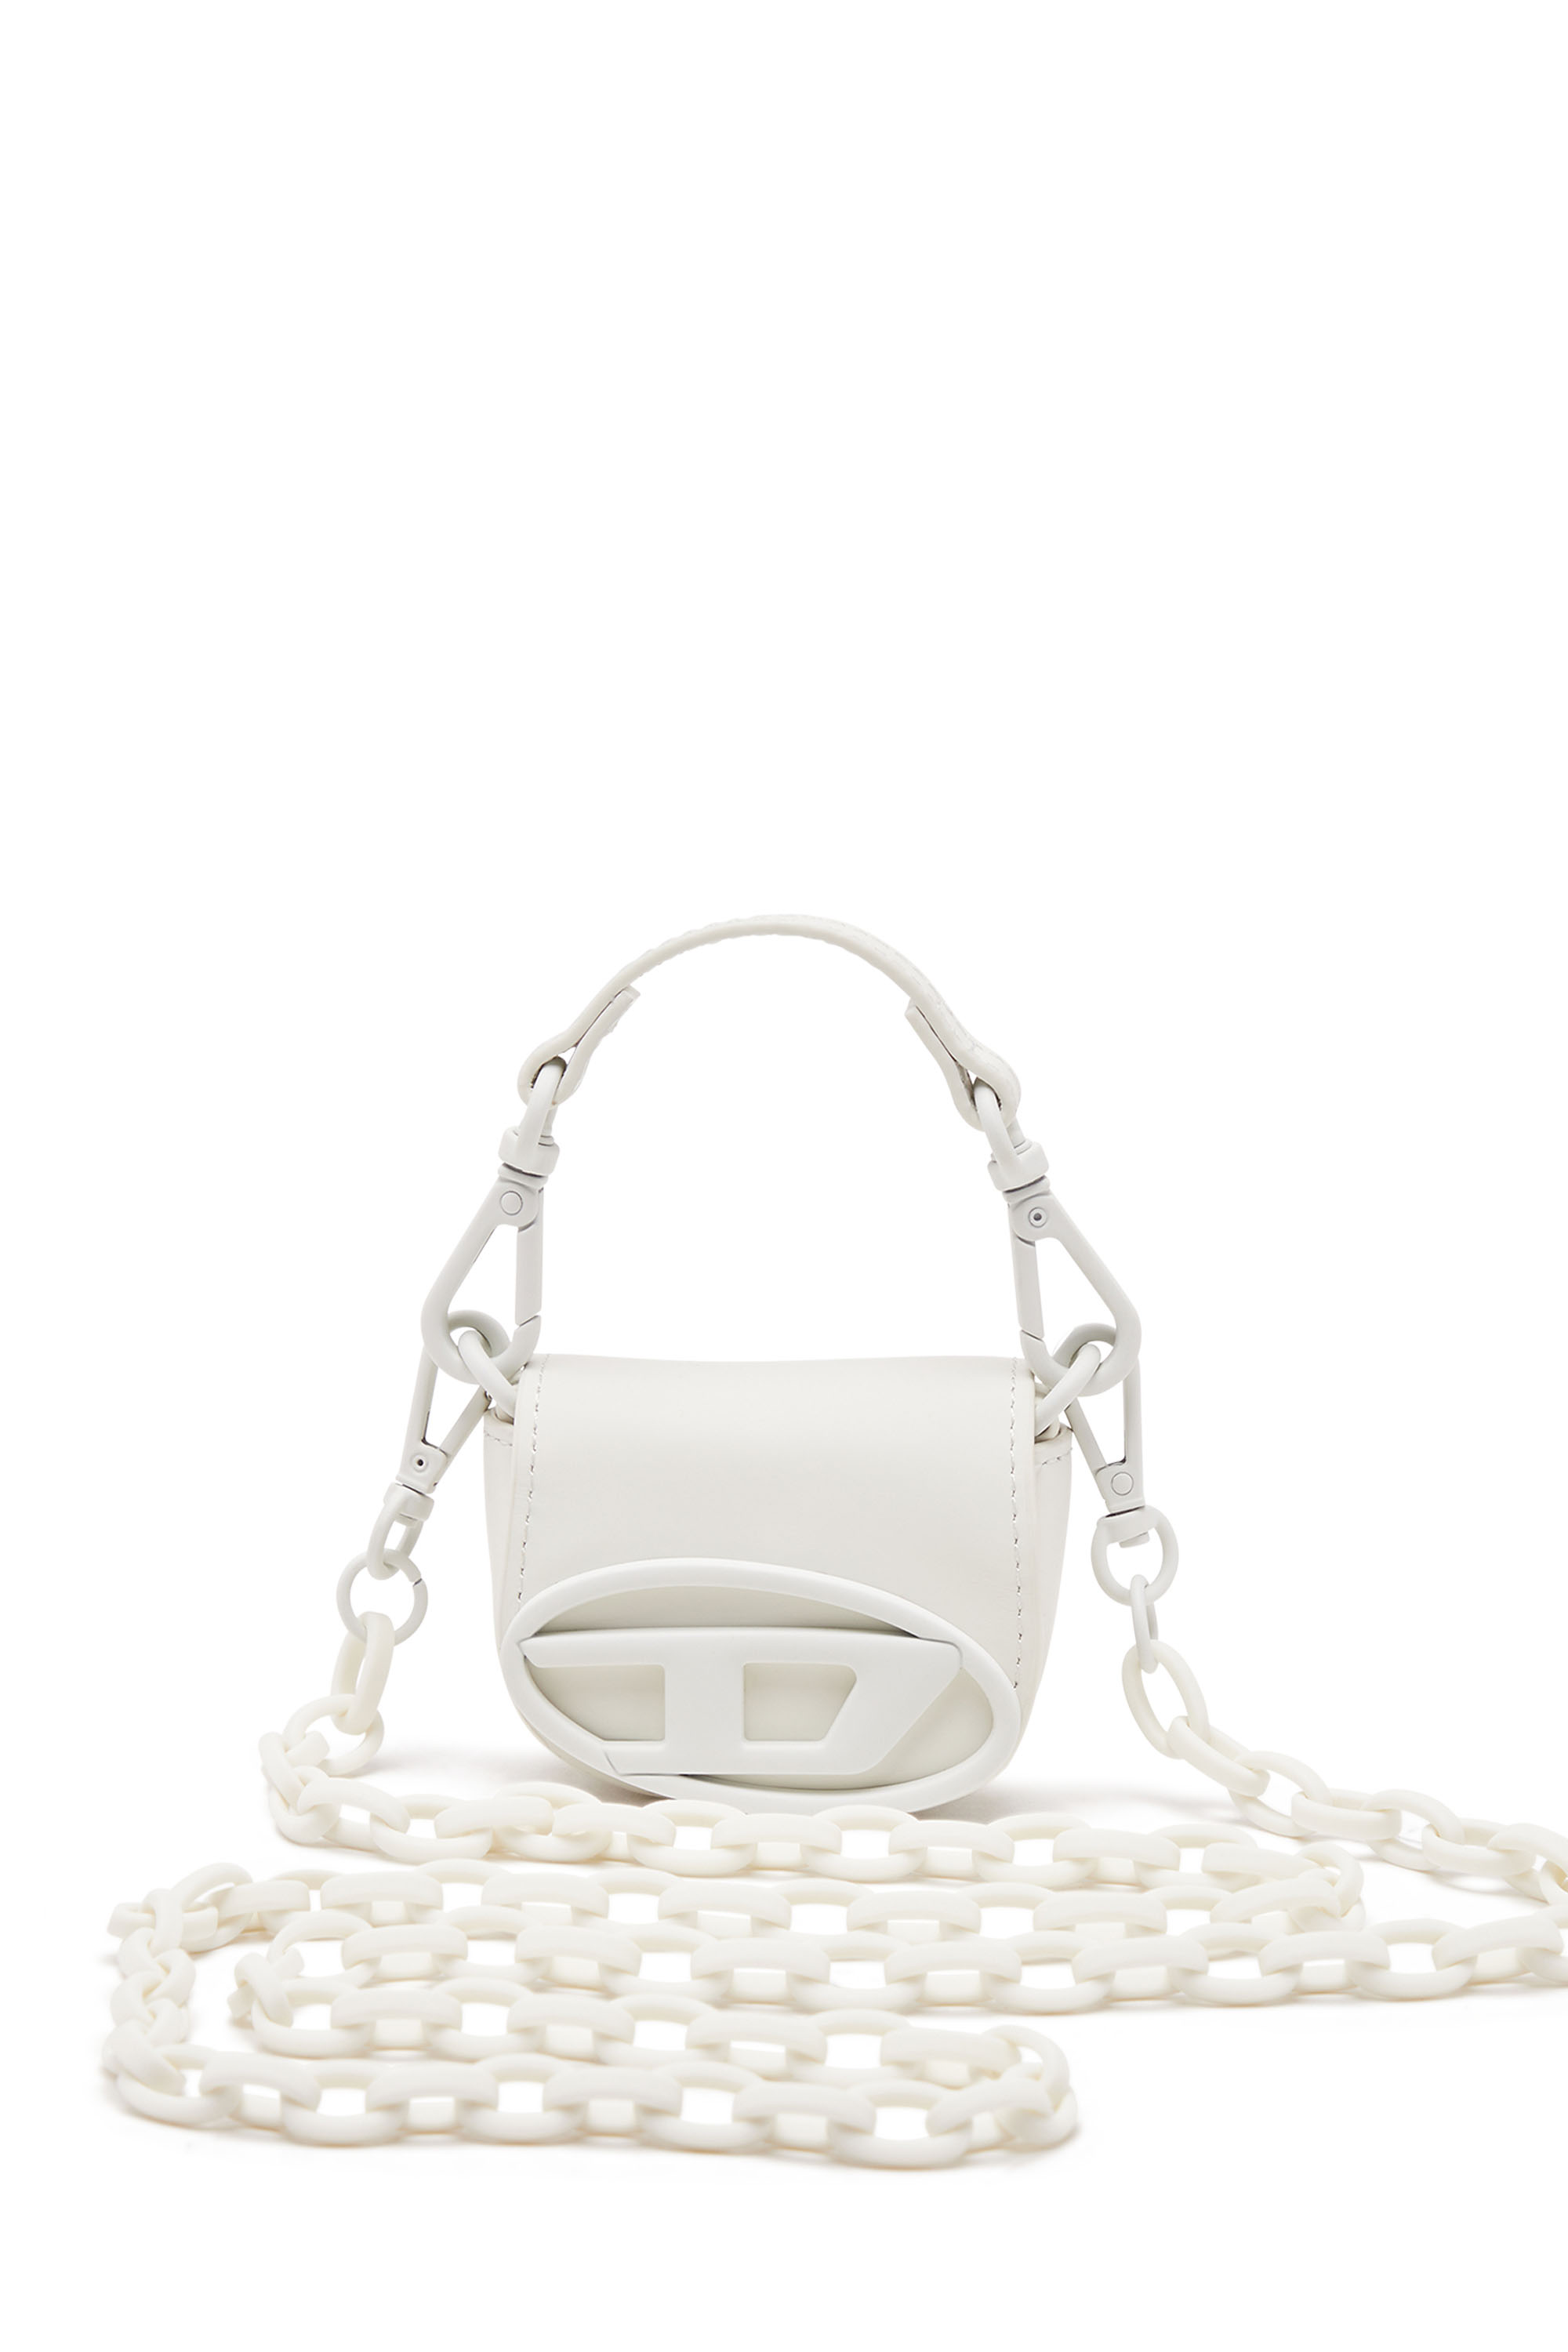 Diesel Iconic Micro Bag Charm In Matte Leather In White